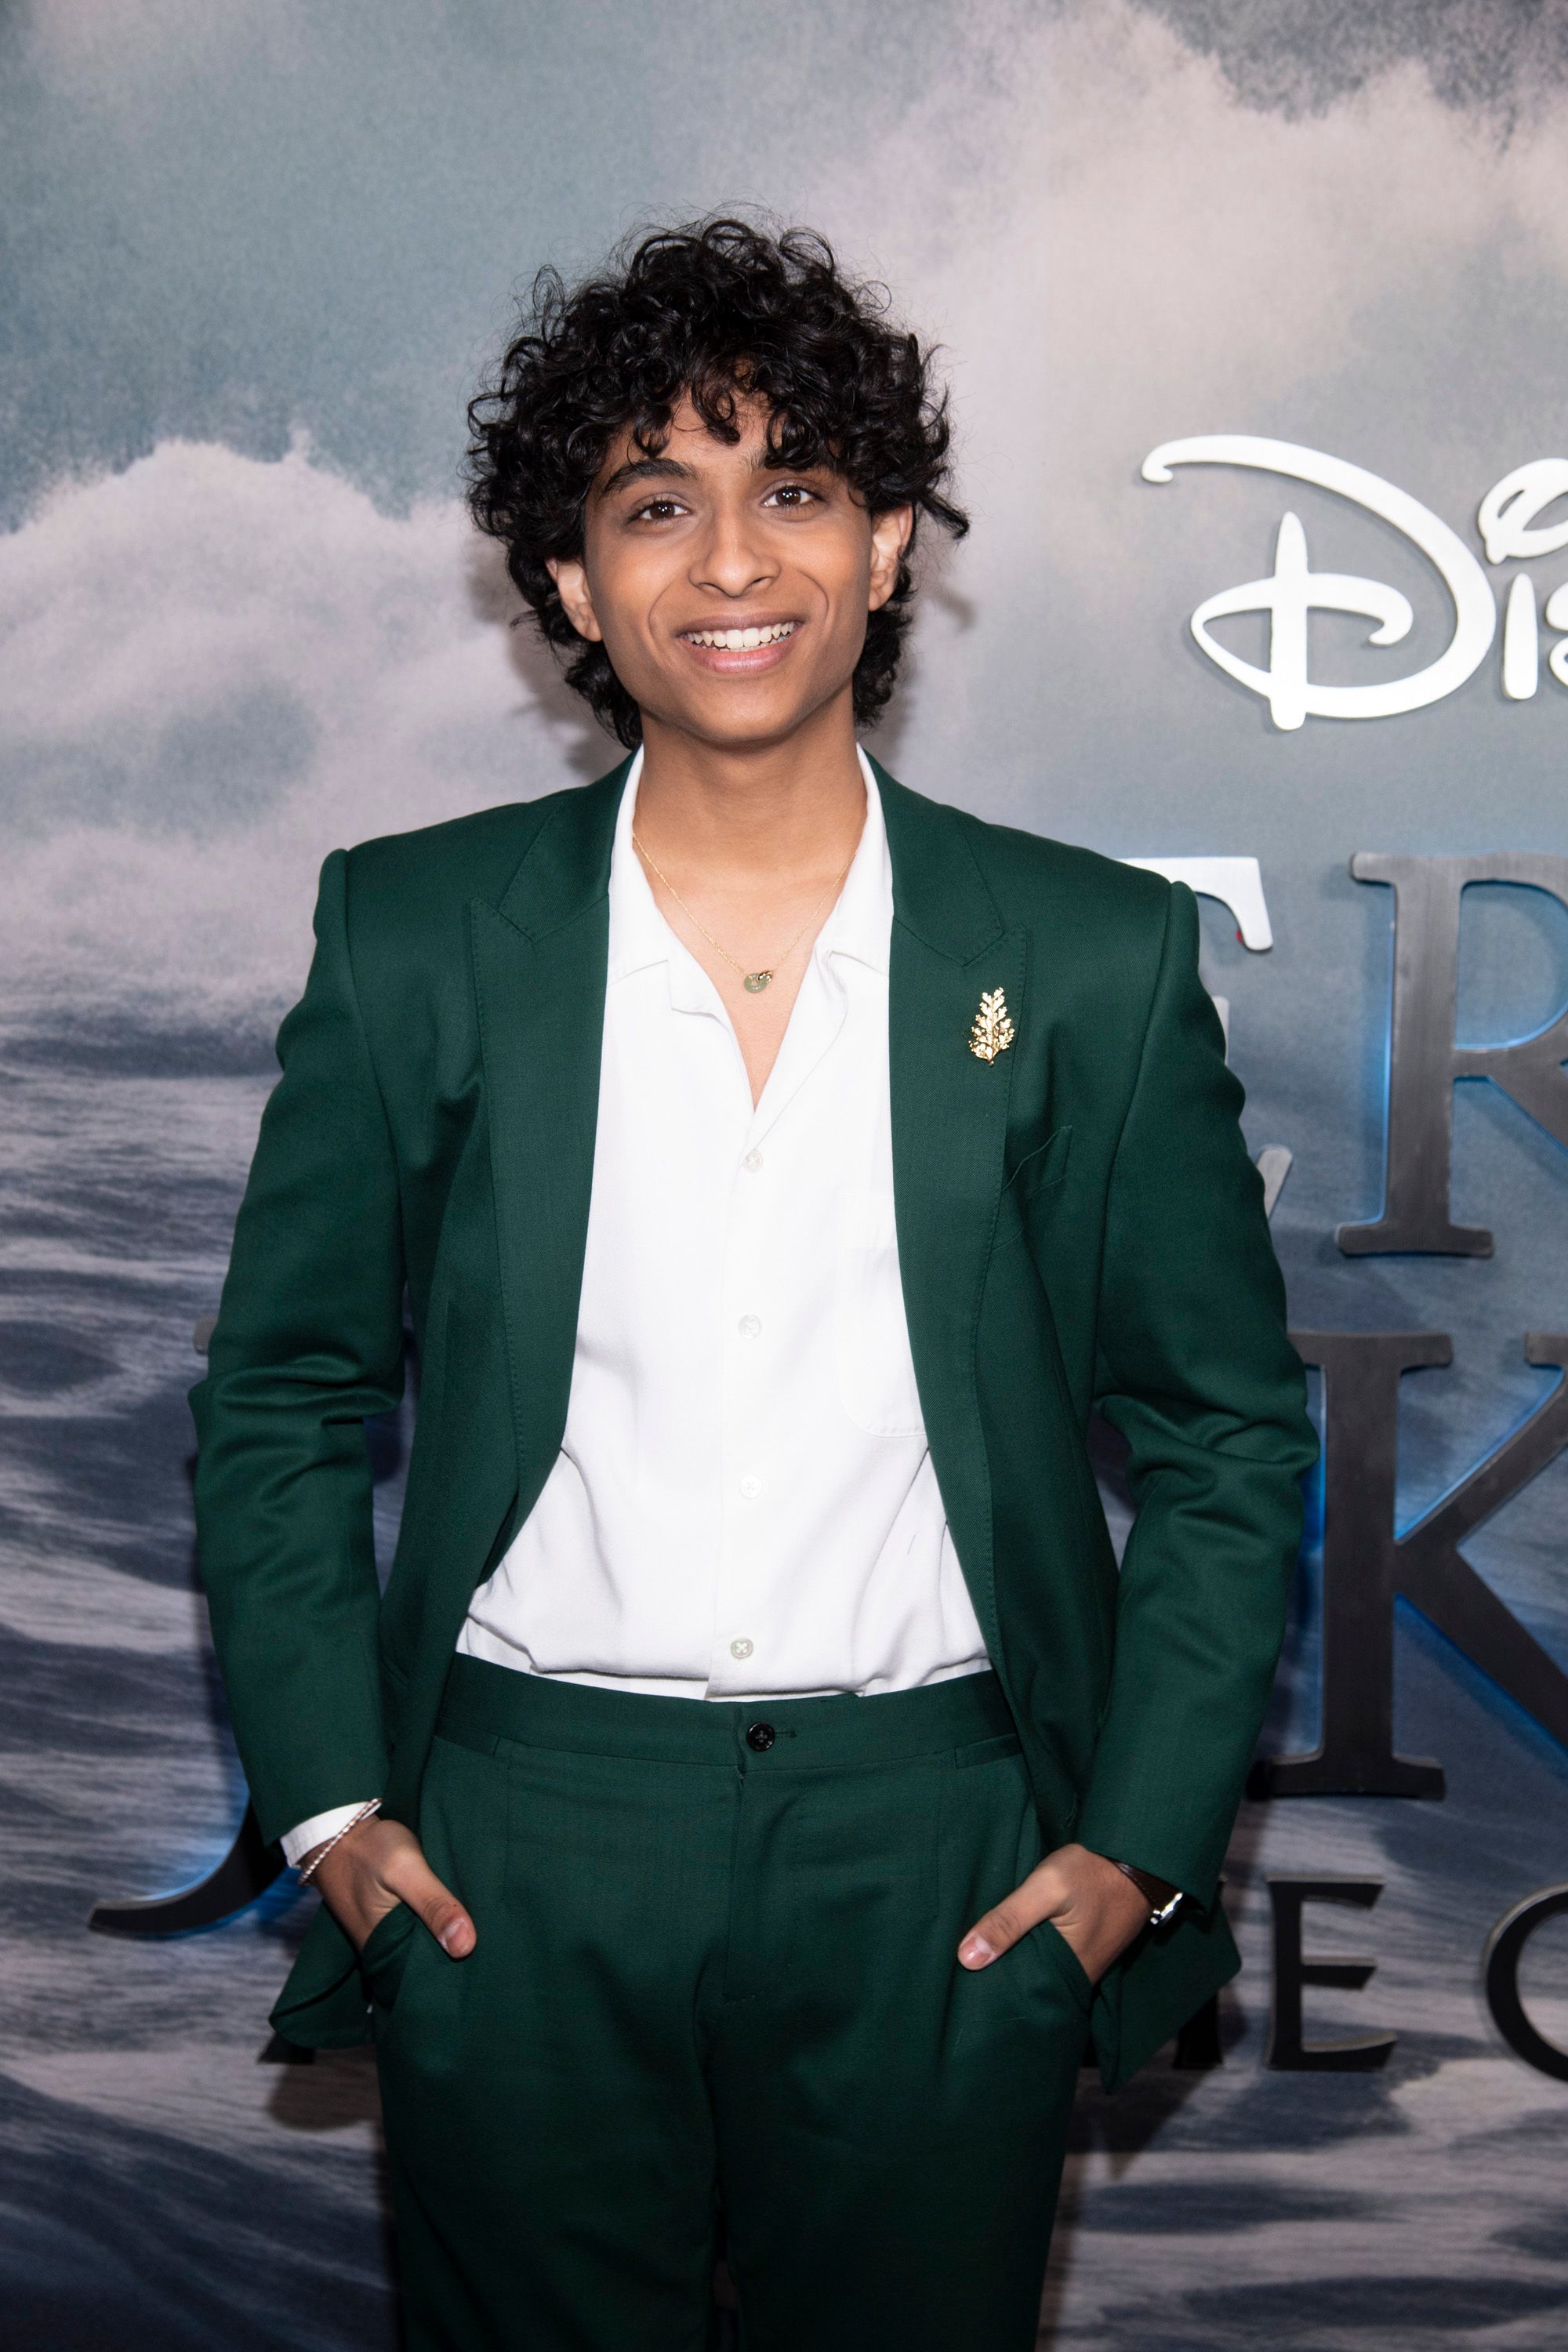 Aryan Simhadri at the world premiere of "Percy Jackson and the Olympians" in New York.